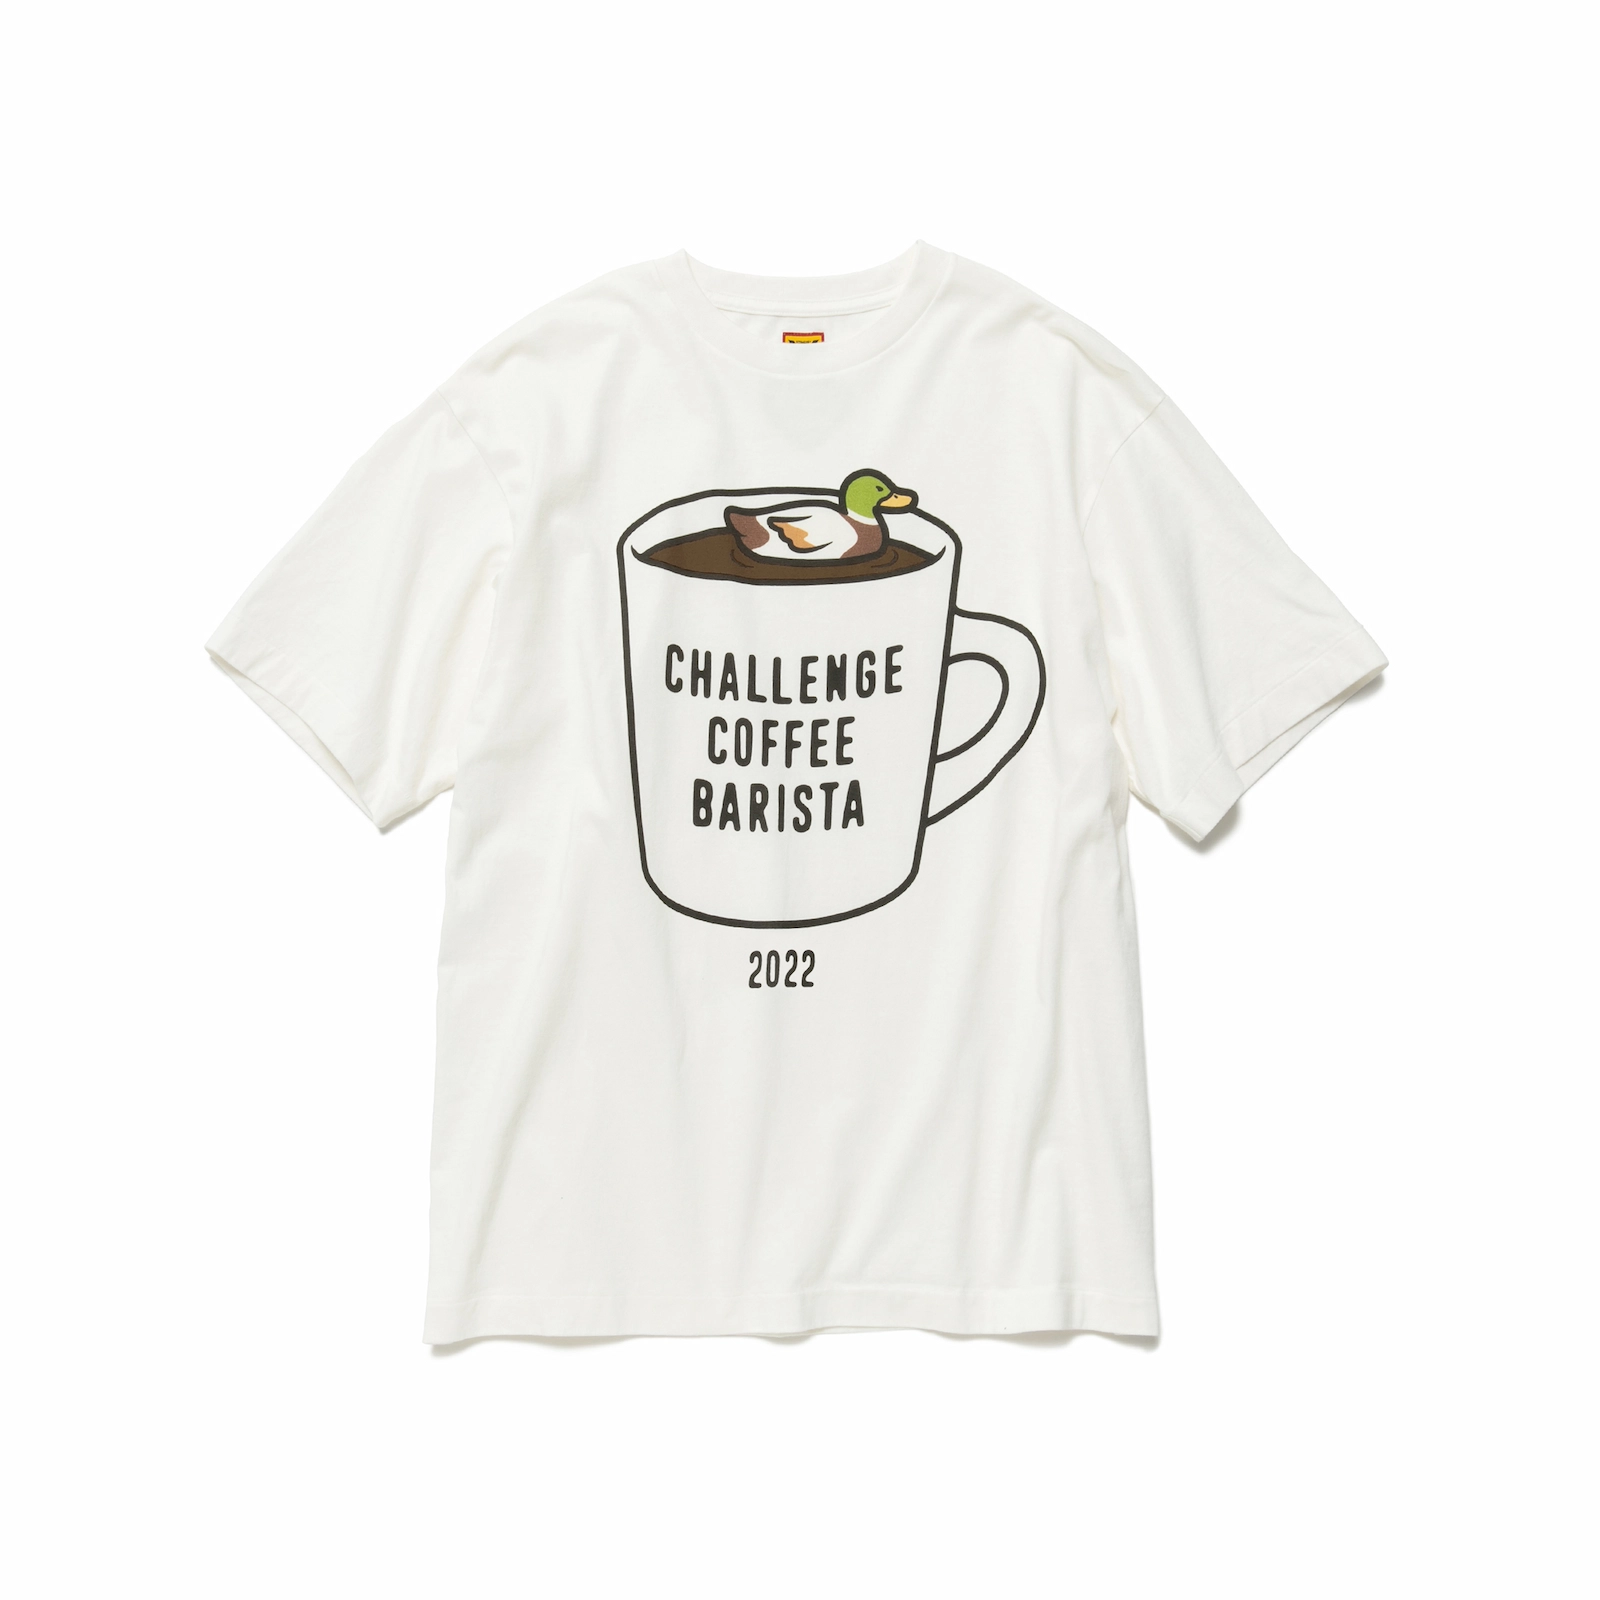 NIGO designs T-shirt for Challenge Coffee Barista 2022, a barista competition for people with disabilities